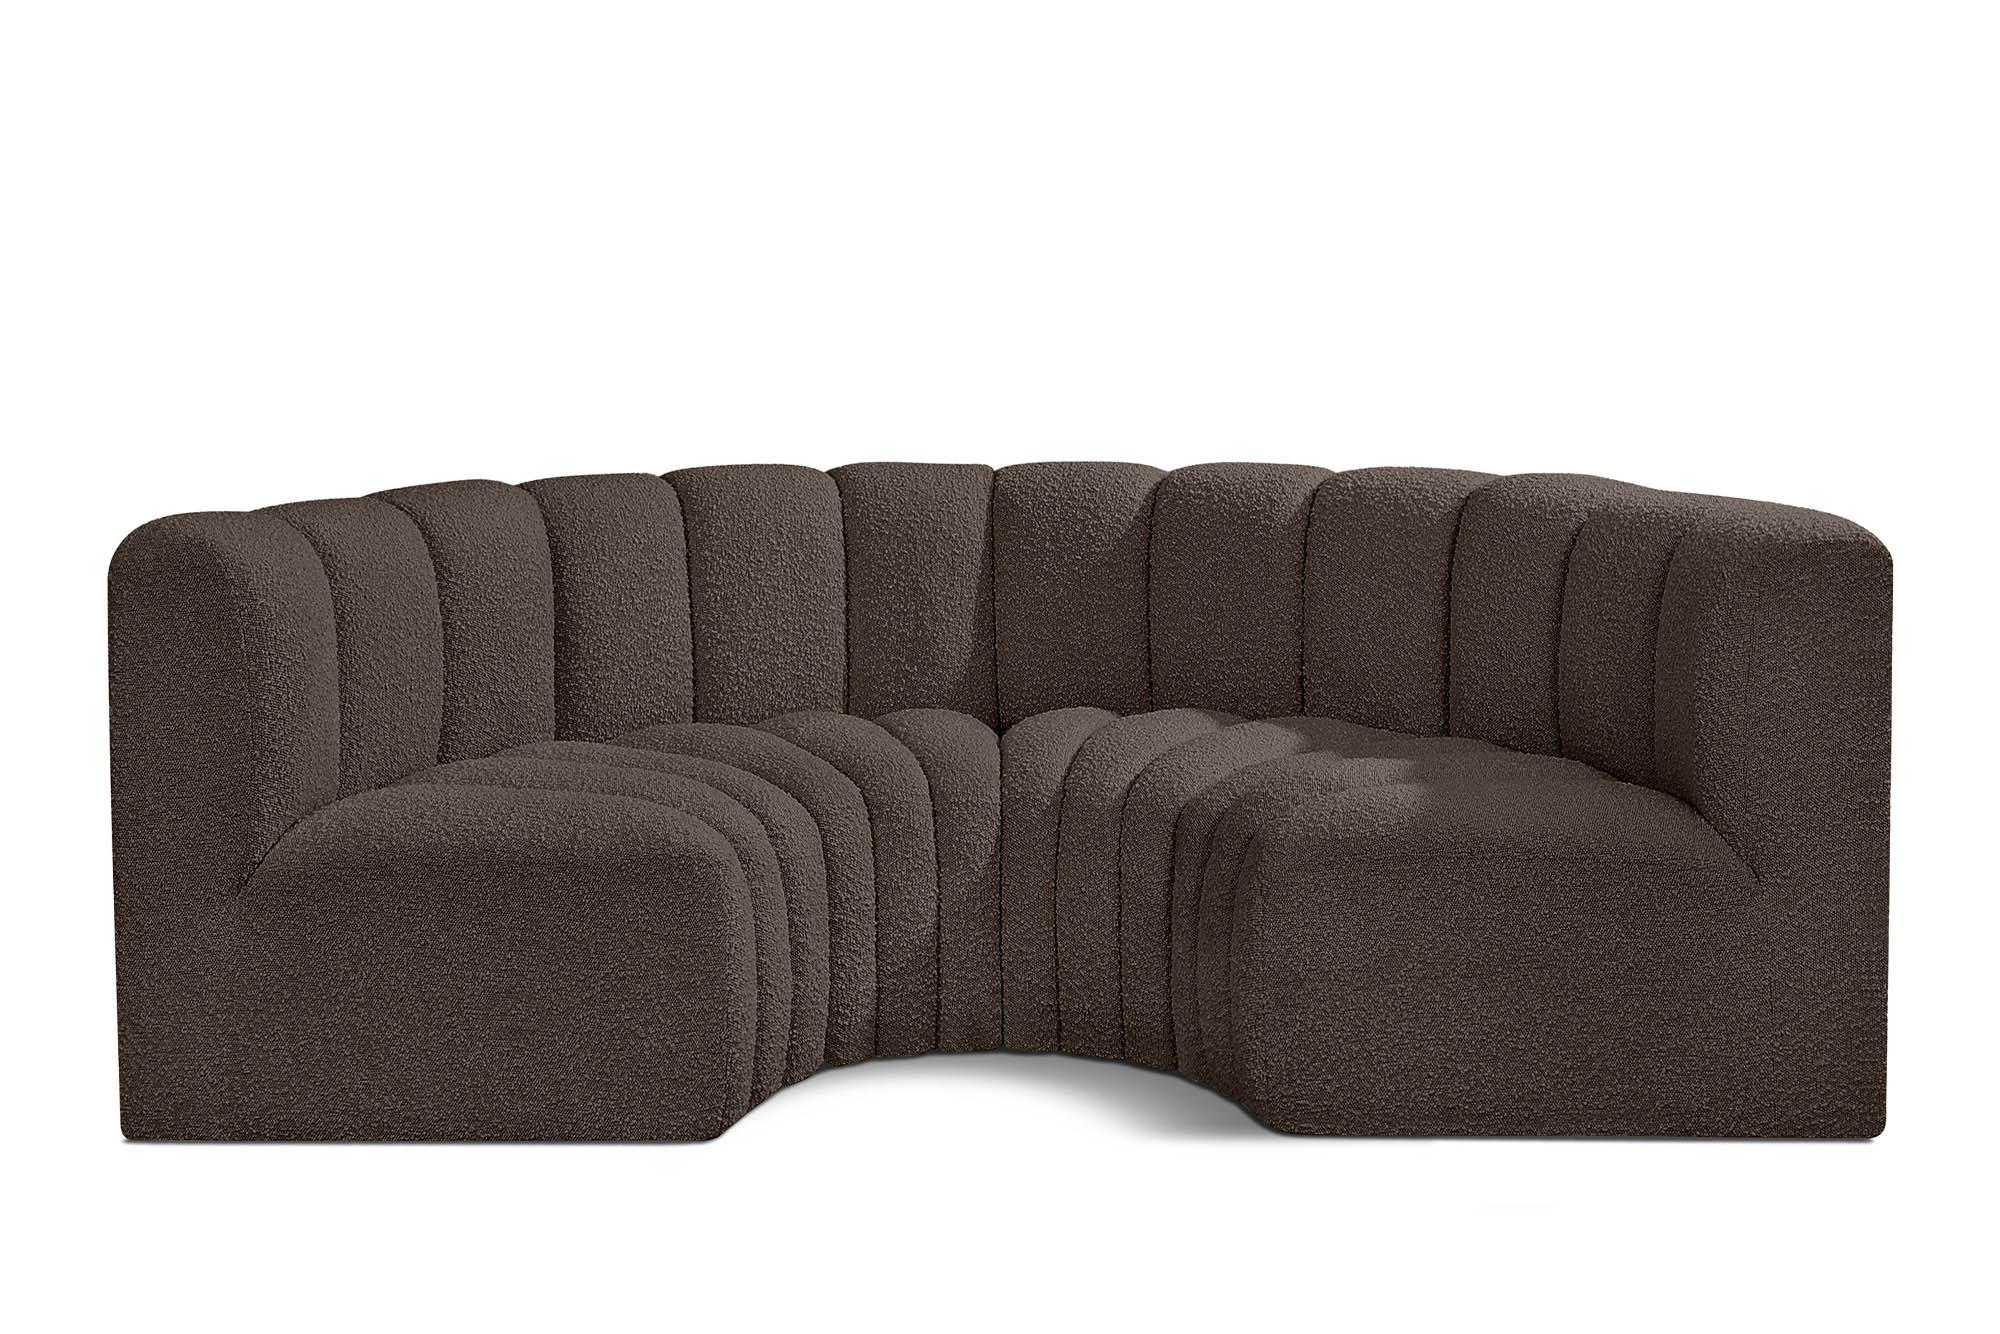 Contemporary, Modern Modular Sectional Sofa ARC 102Brown-S4C 102Brown-S4C in Brown 